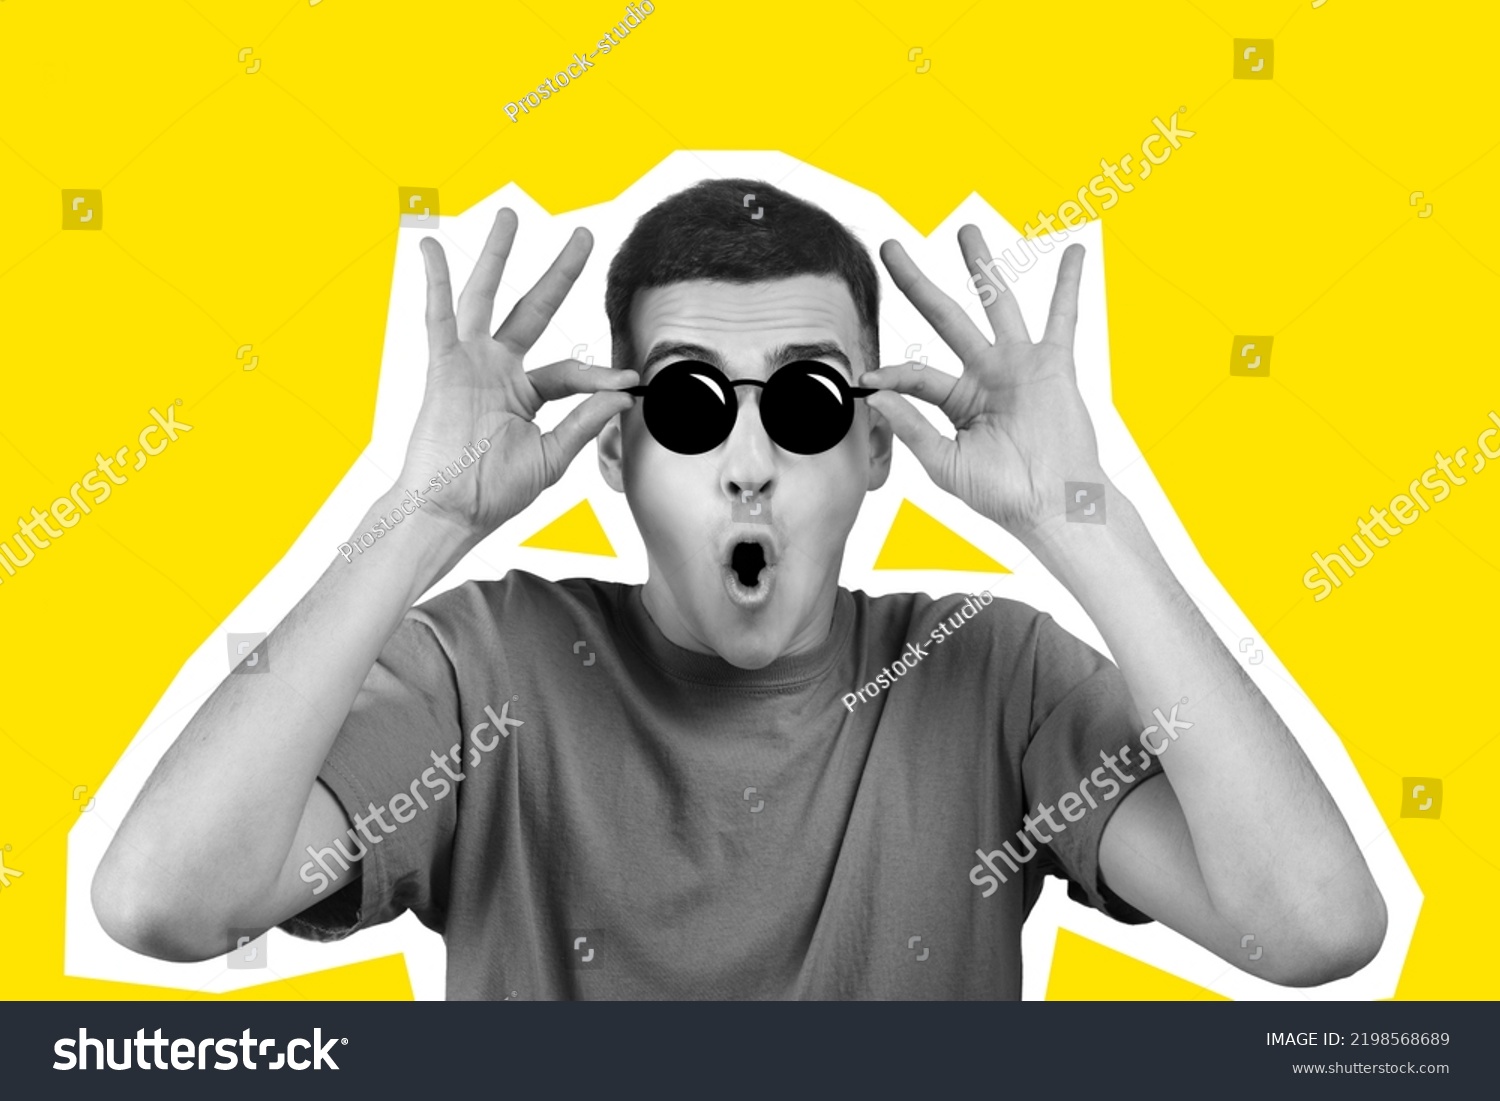 Excited young man in t-shirt touching his eyeglasses, mouth open, amazed guy looking at amazing offer or deal, yellow studio background, collage, black and white people on colorful backgrounds #2198568689